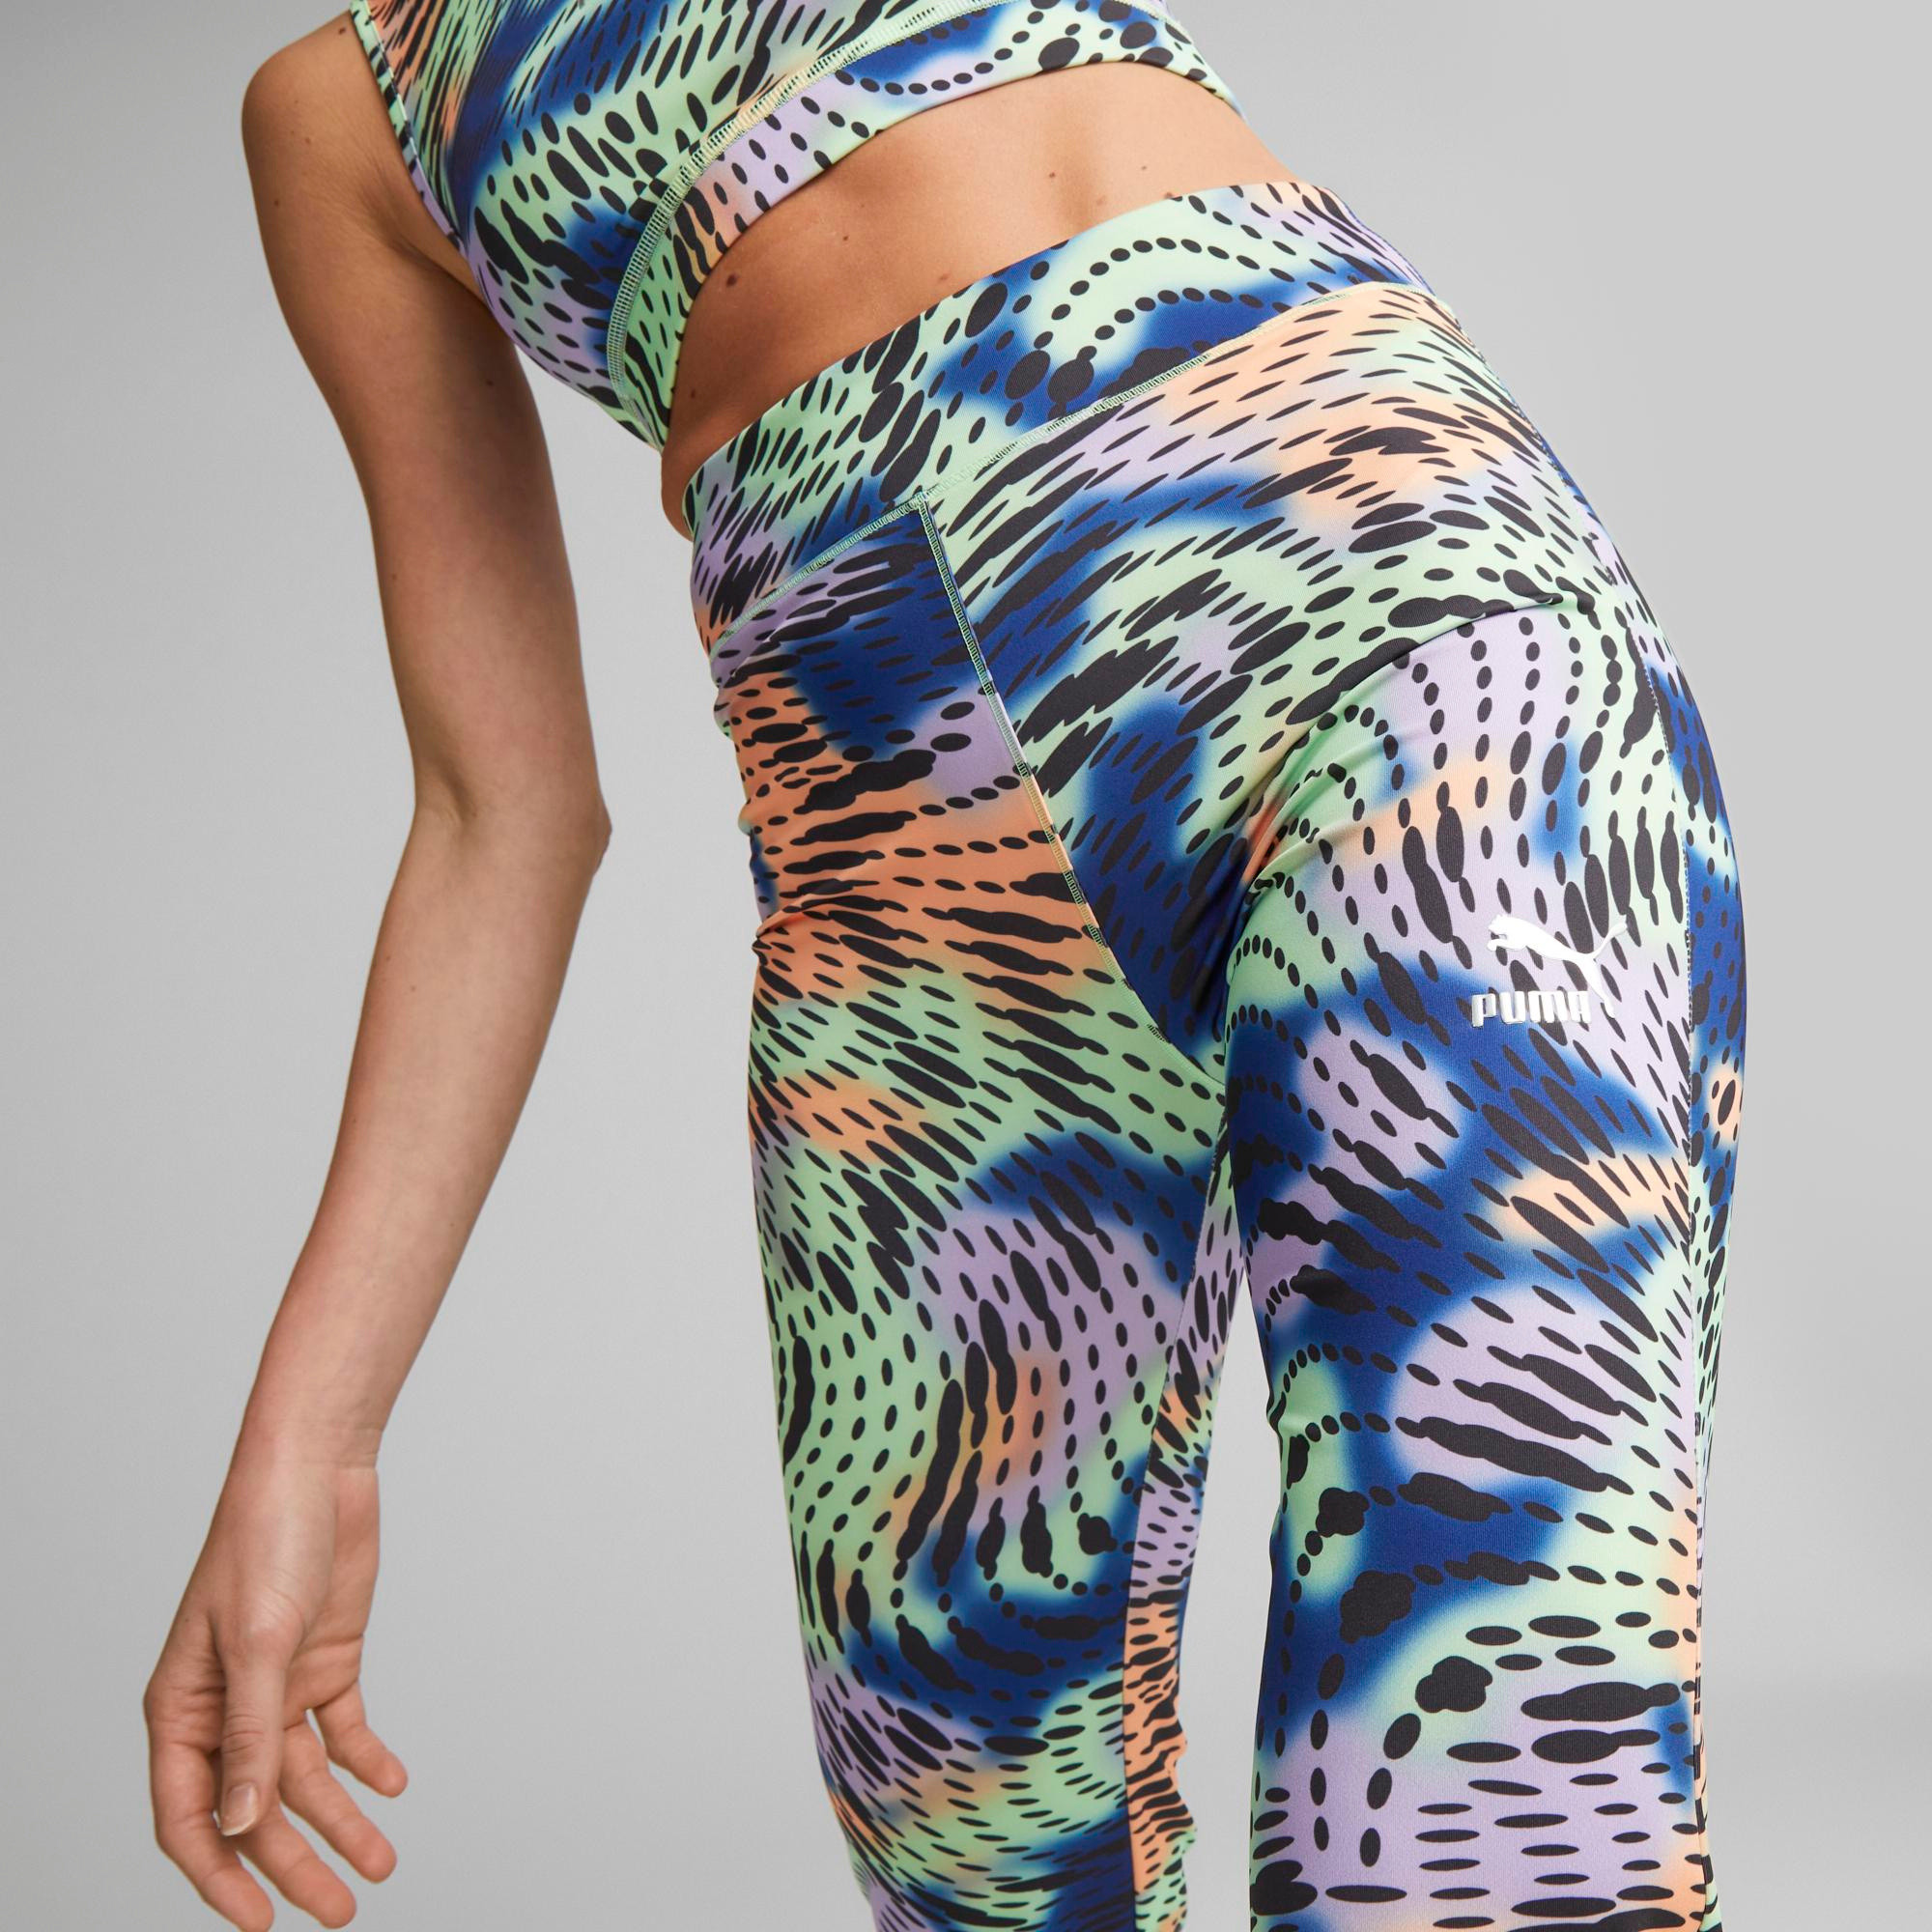 Puma - Flared trousers with all over print, Multicolor, large image number 4